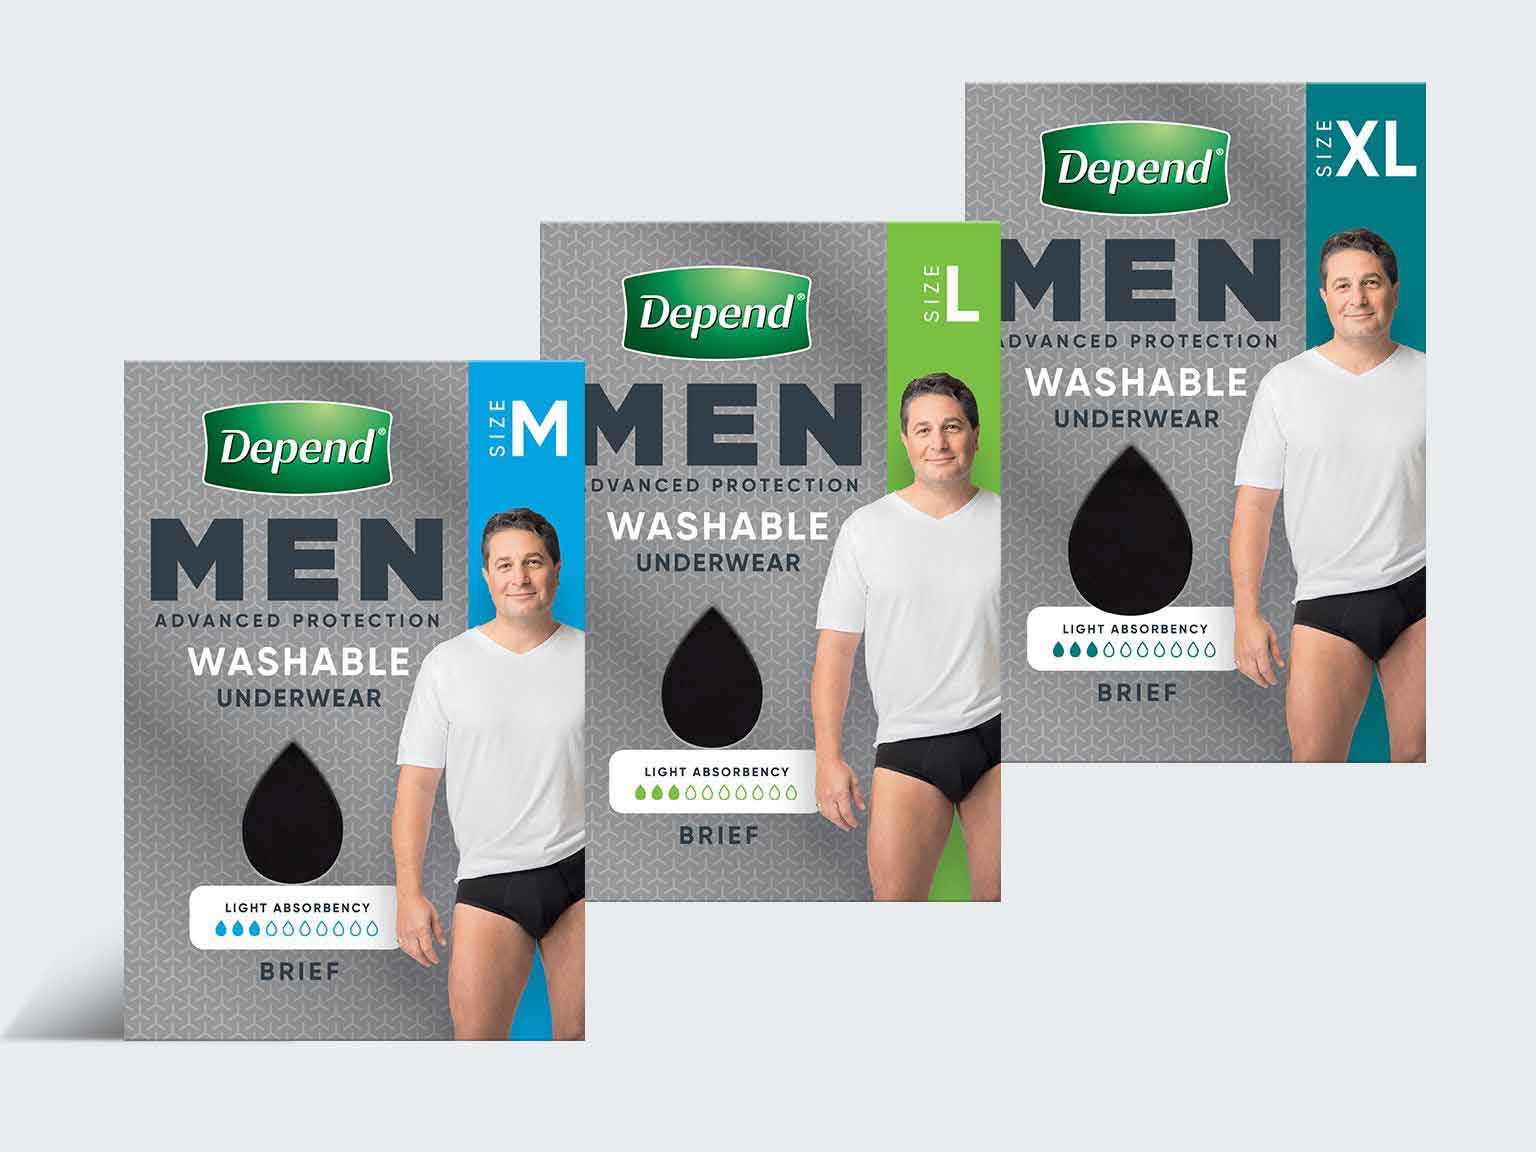 Depend® Men Advanced Protection Washable Incontinence Underwear